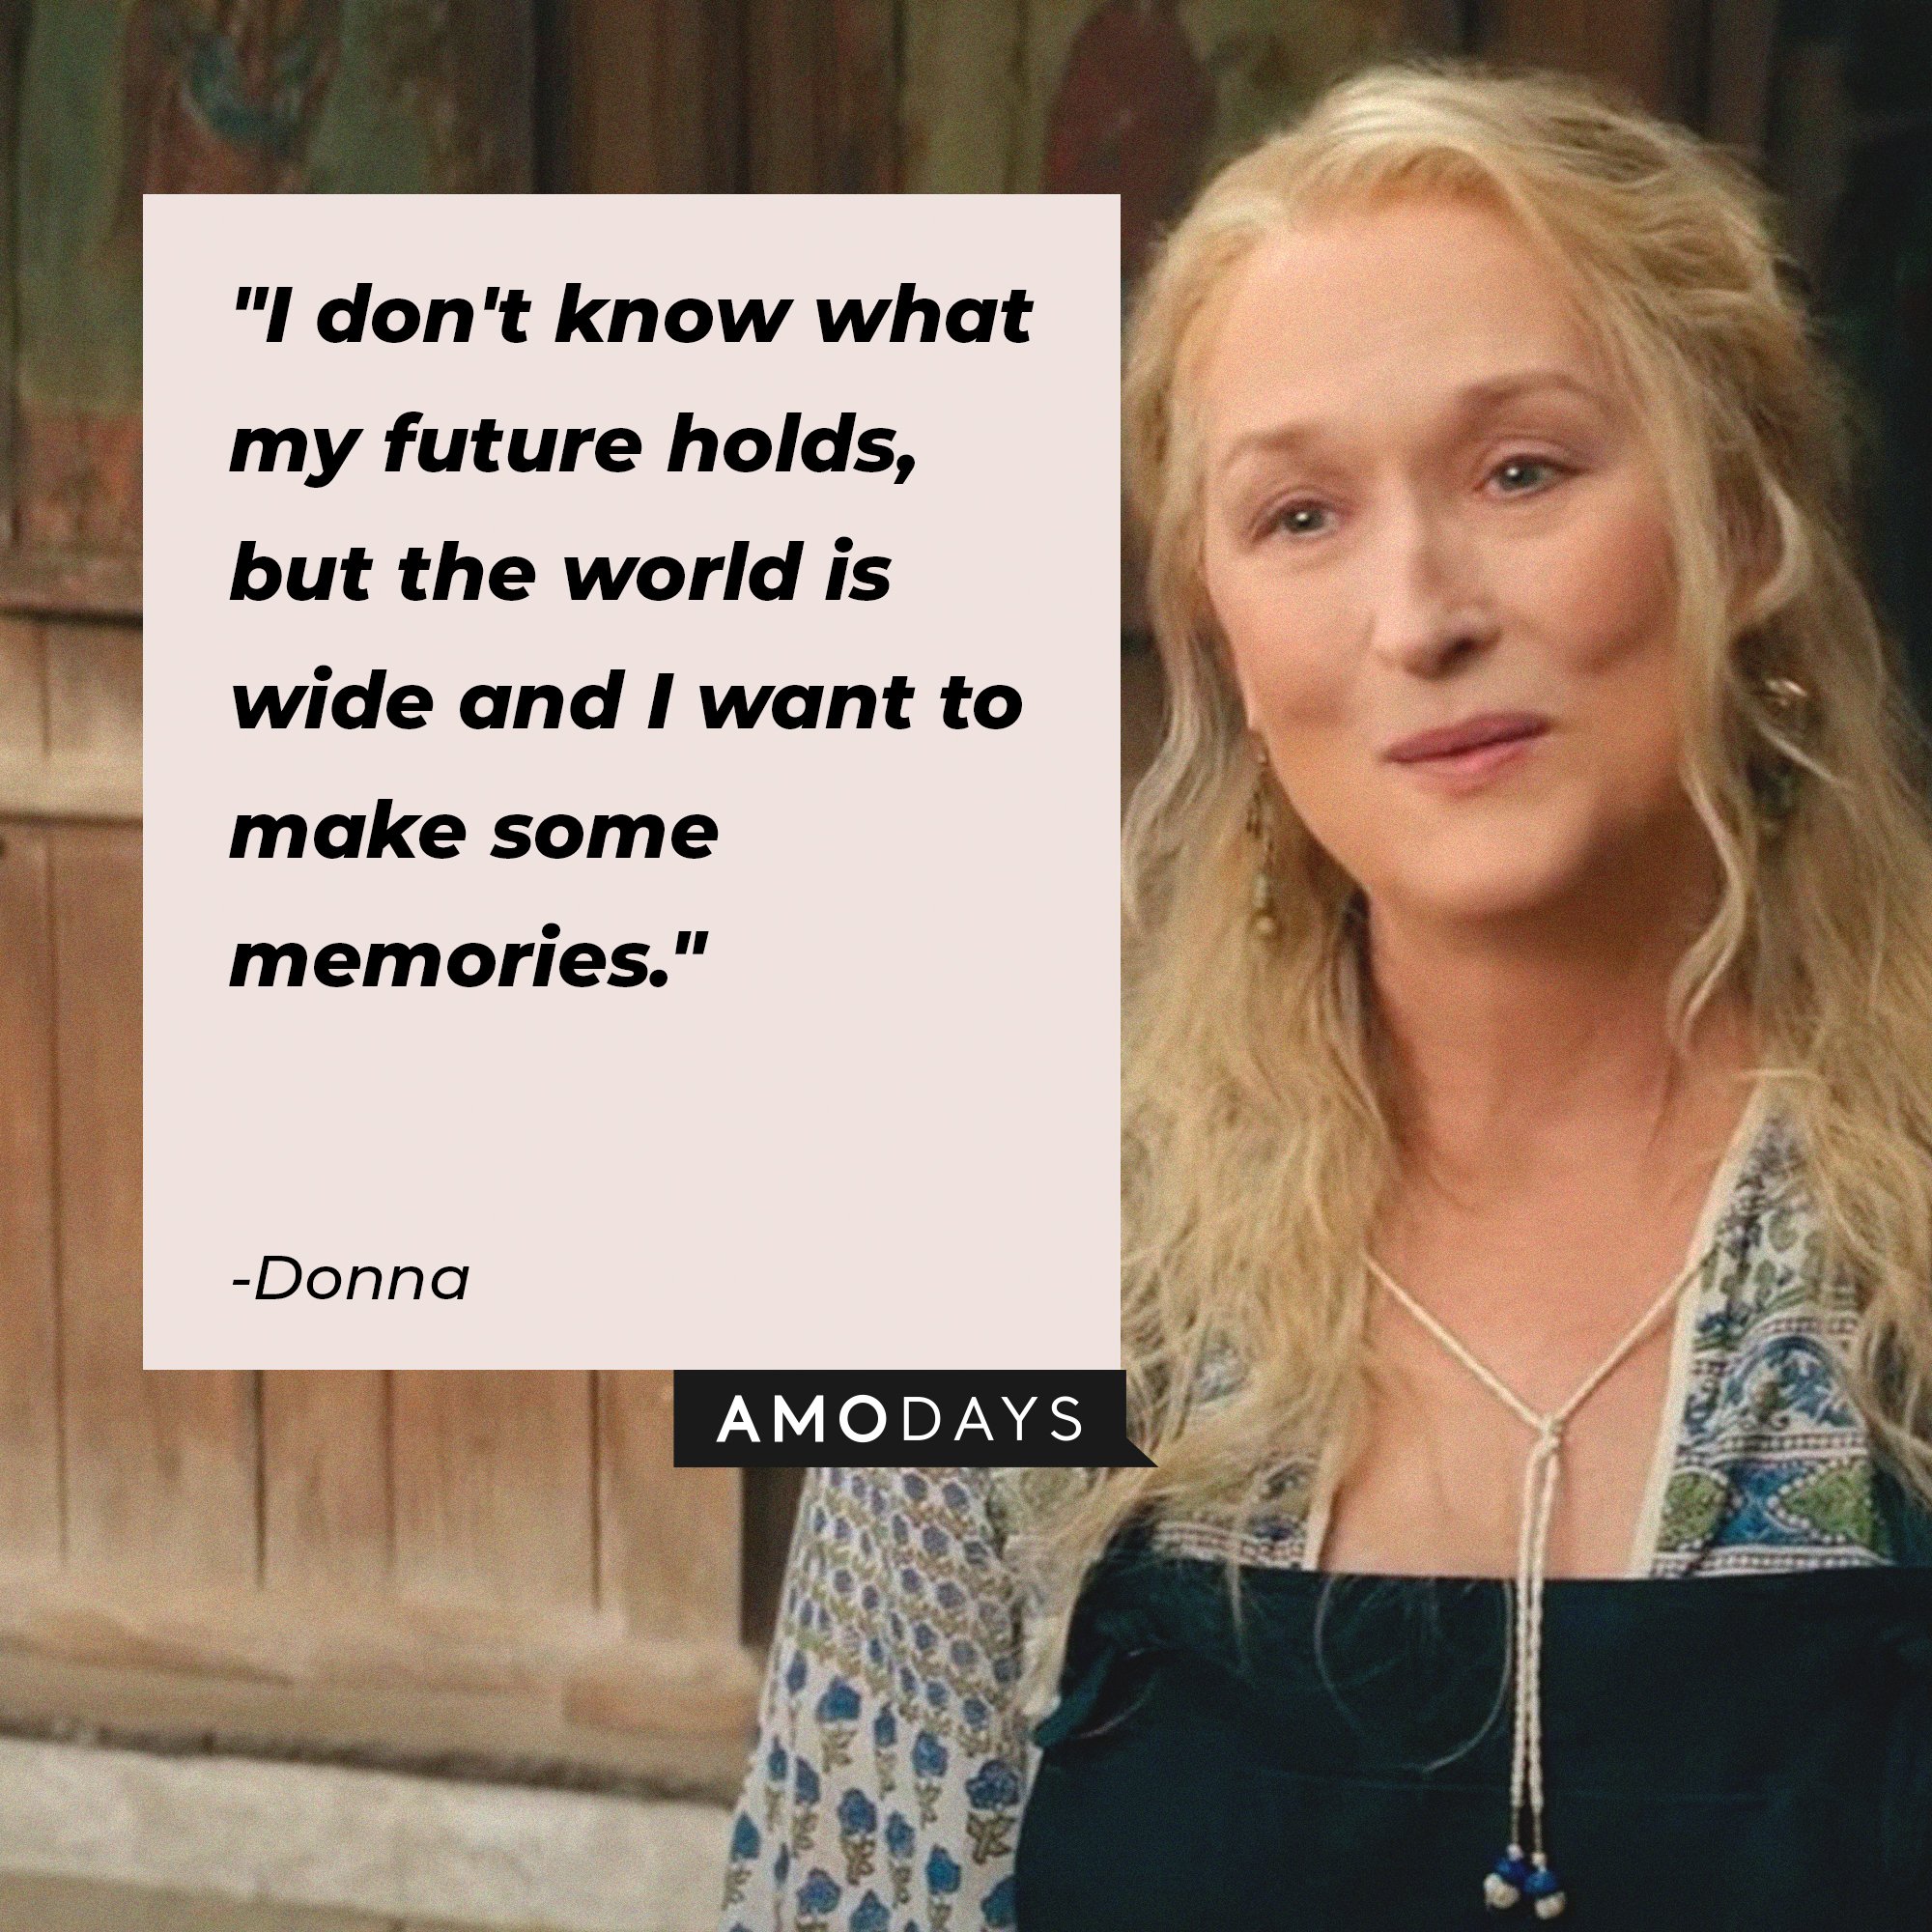 Donna's quote: "I don't know what my future holds, but the world is wide and I want to make some memories." | Image: AmoDays